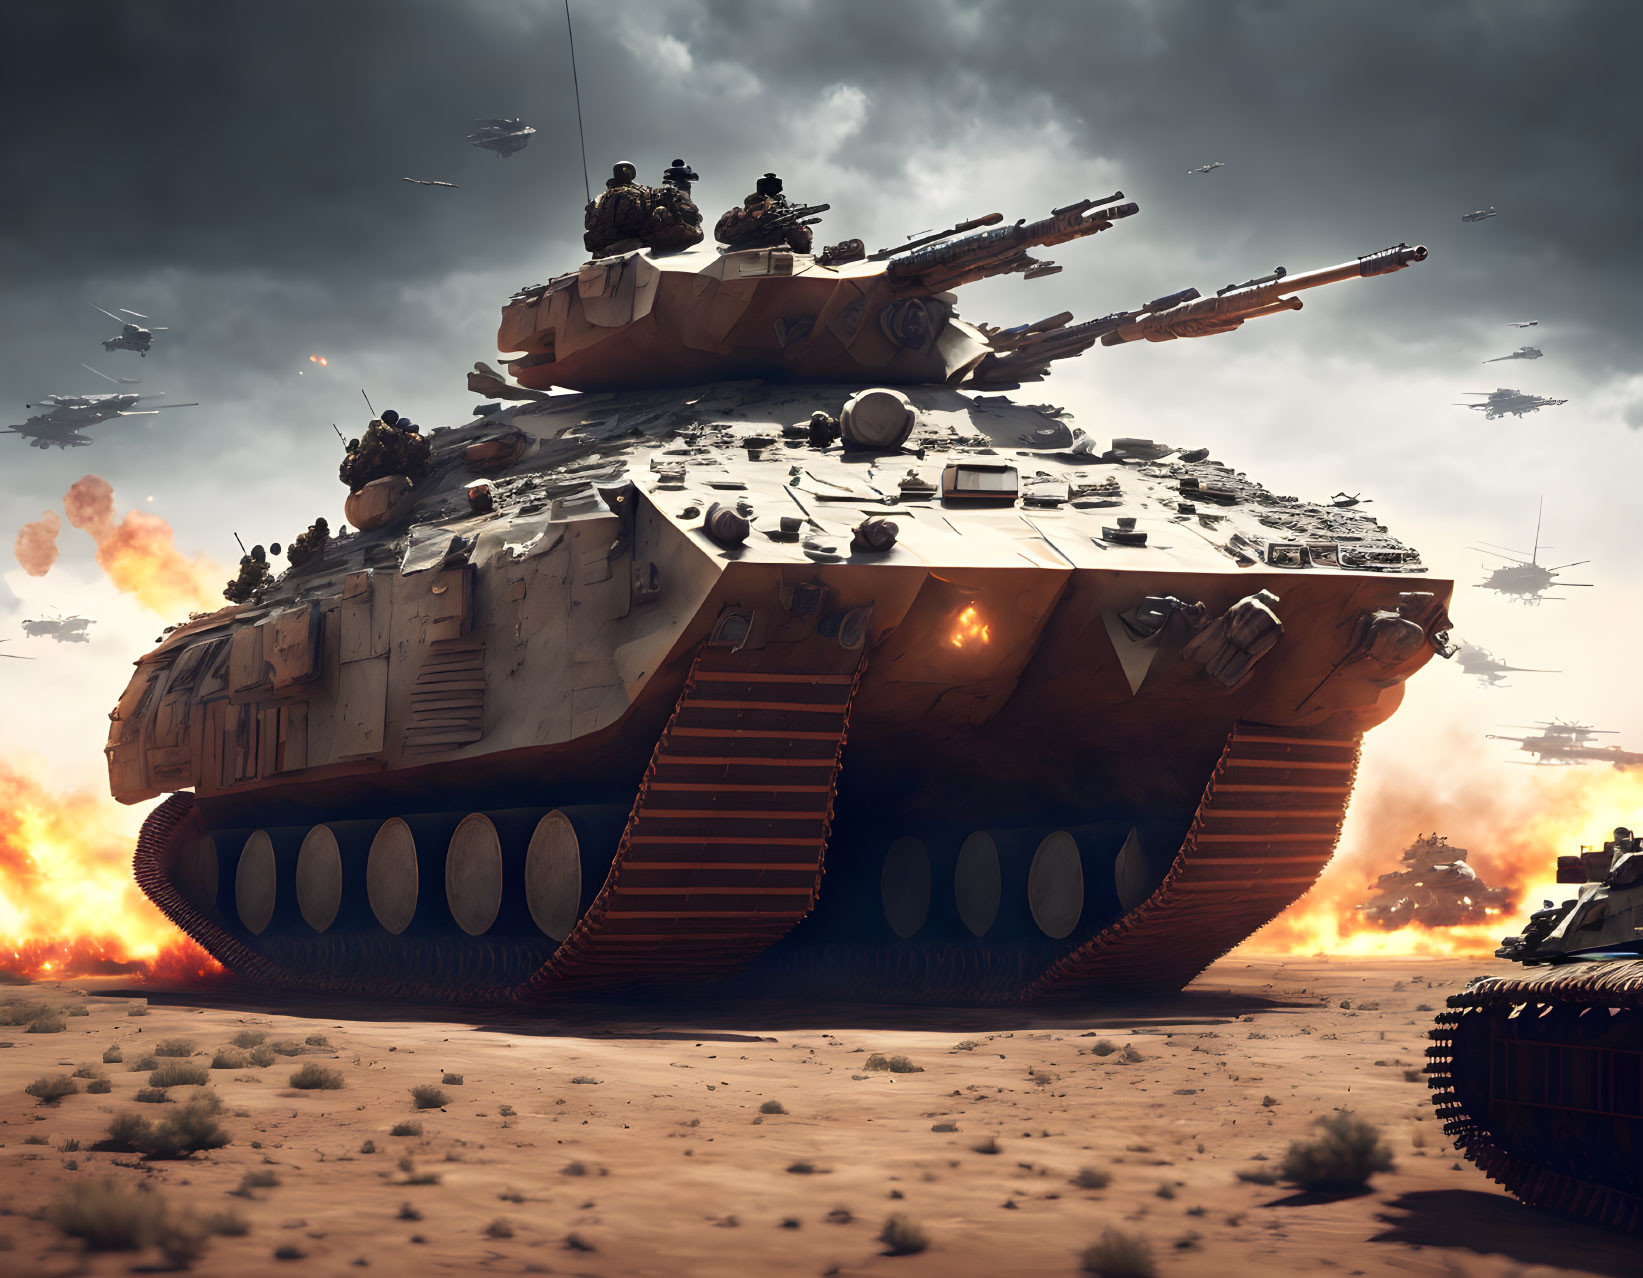 Futuristic tank on barren battlefield with soldiers, explosions, and combat drones.